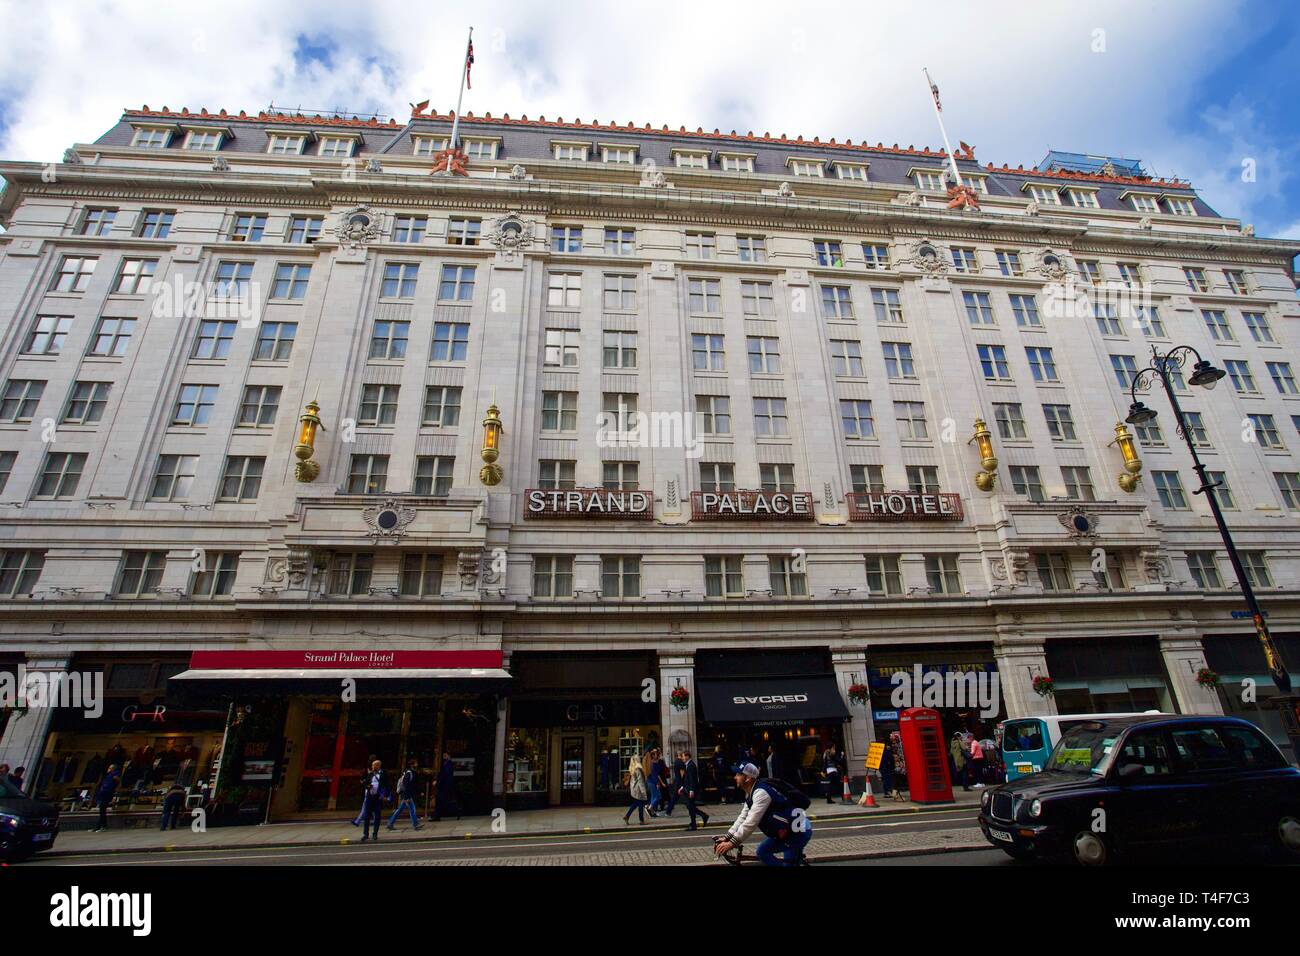 Strand Palace Hotel, Londres, Angleterre. Banque D'Images